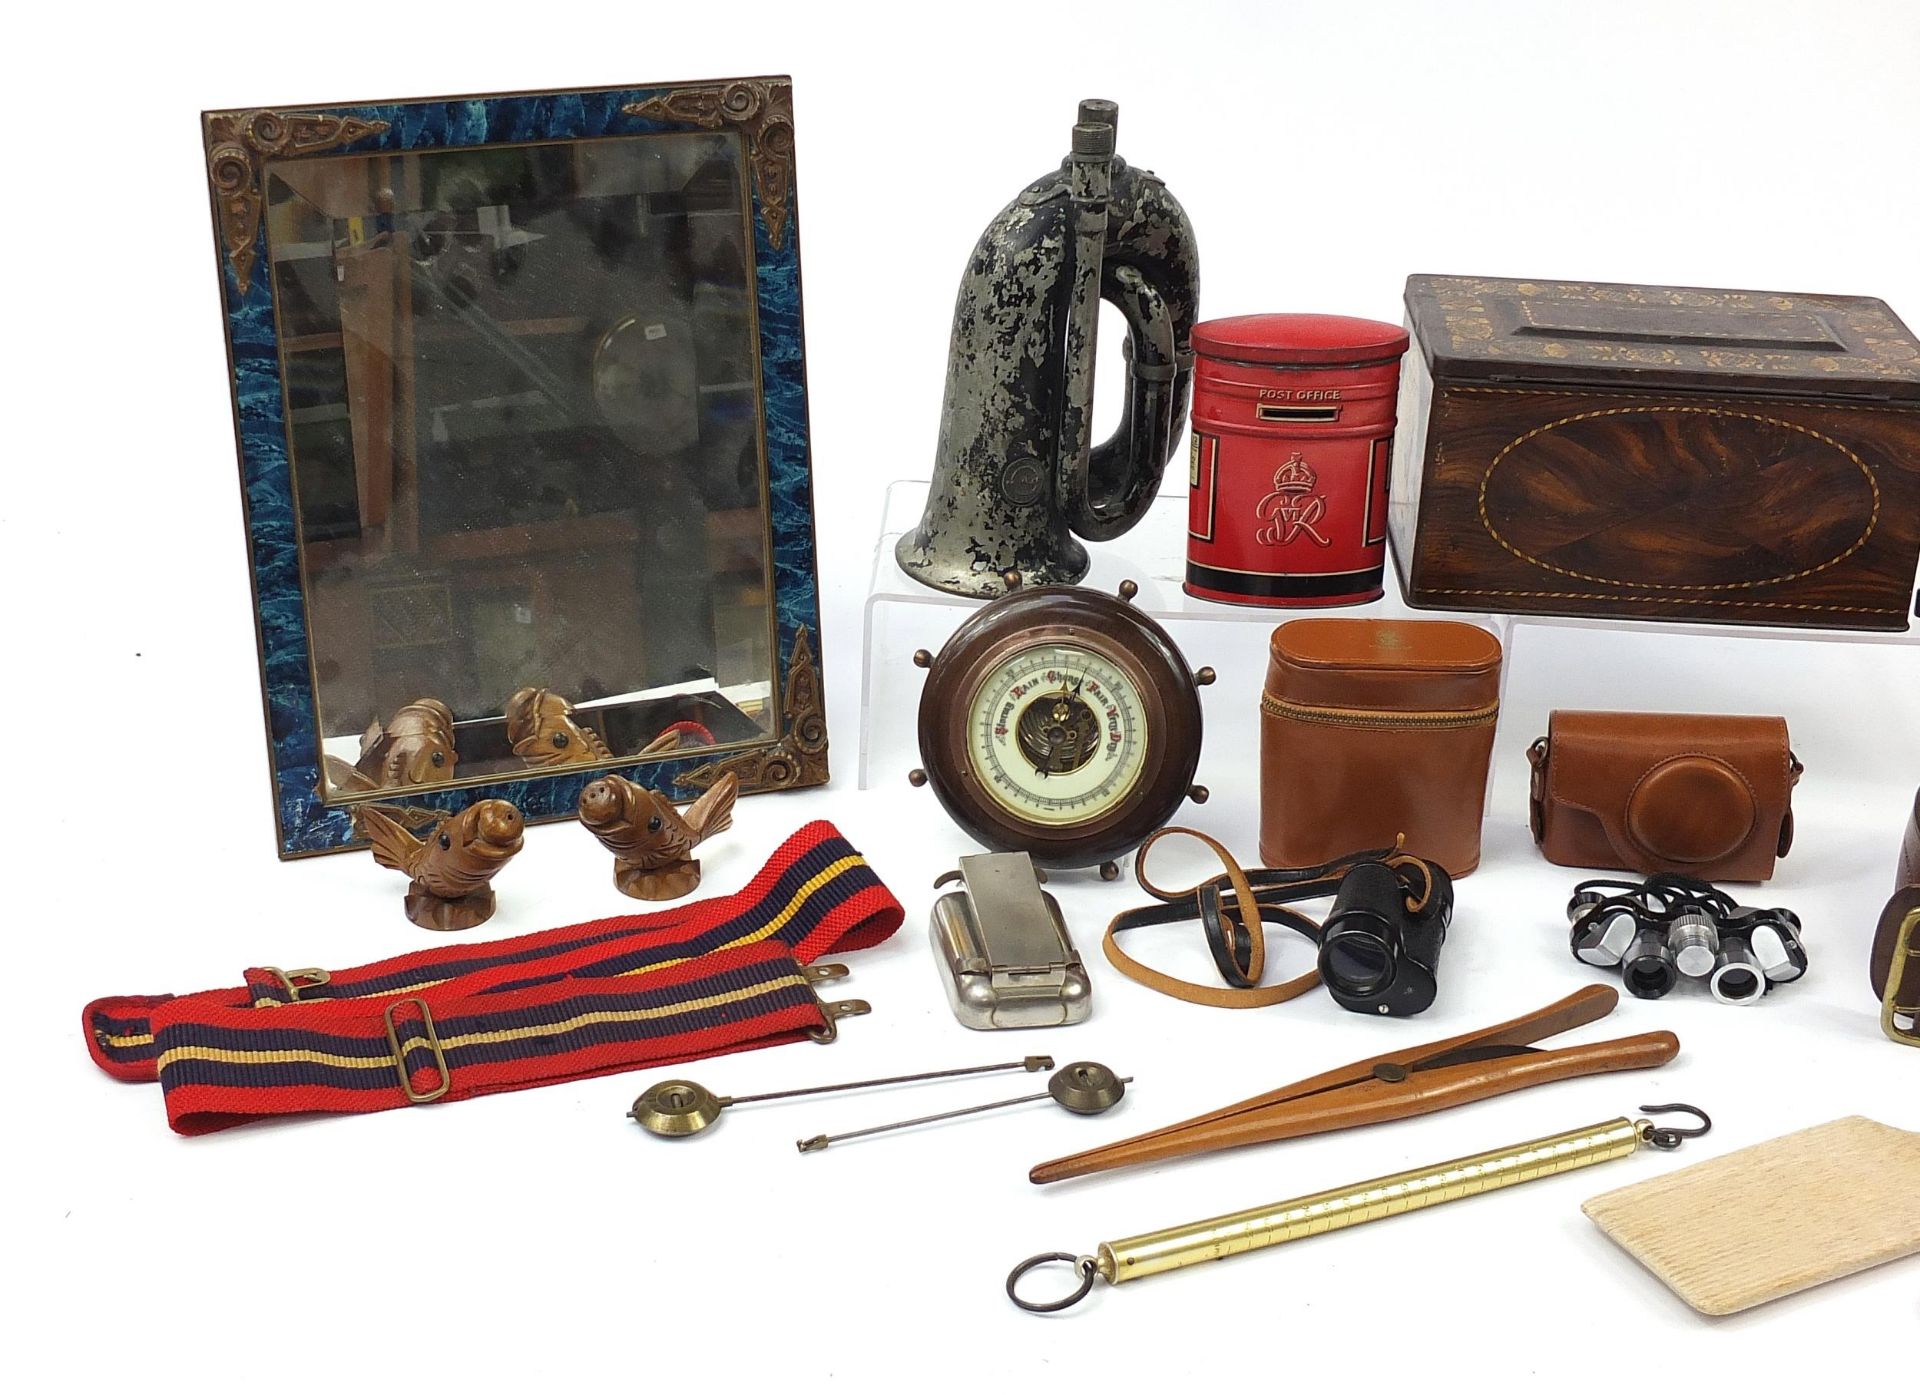 Sundry items including ship's style barometer, bugle, monocular, desk barometer and hydrometer and a - Image 2 of 3